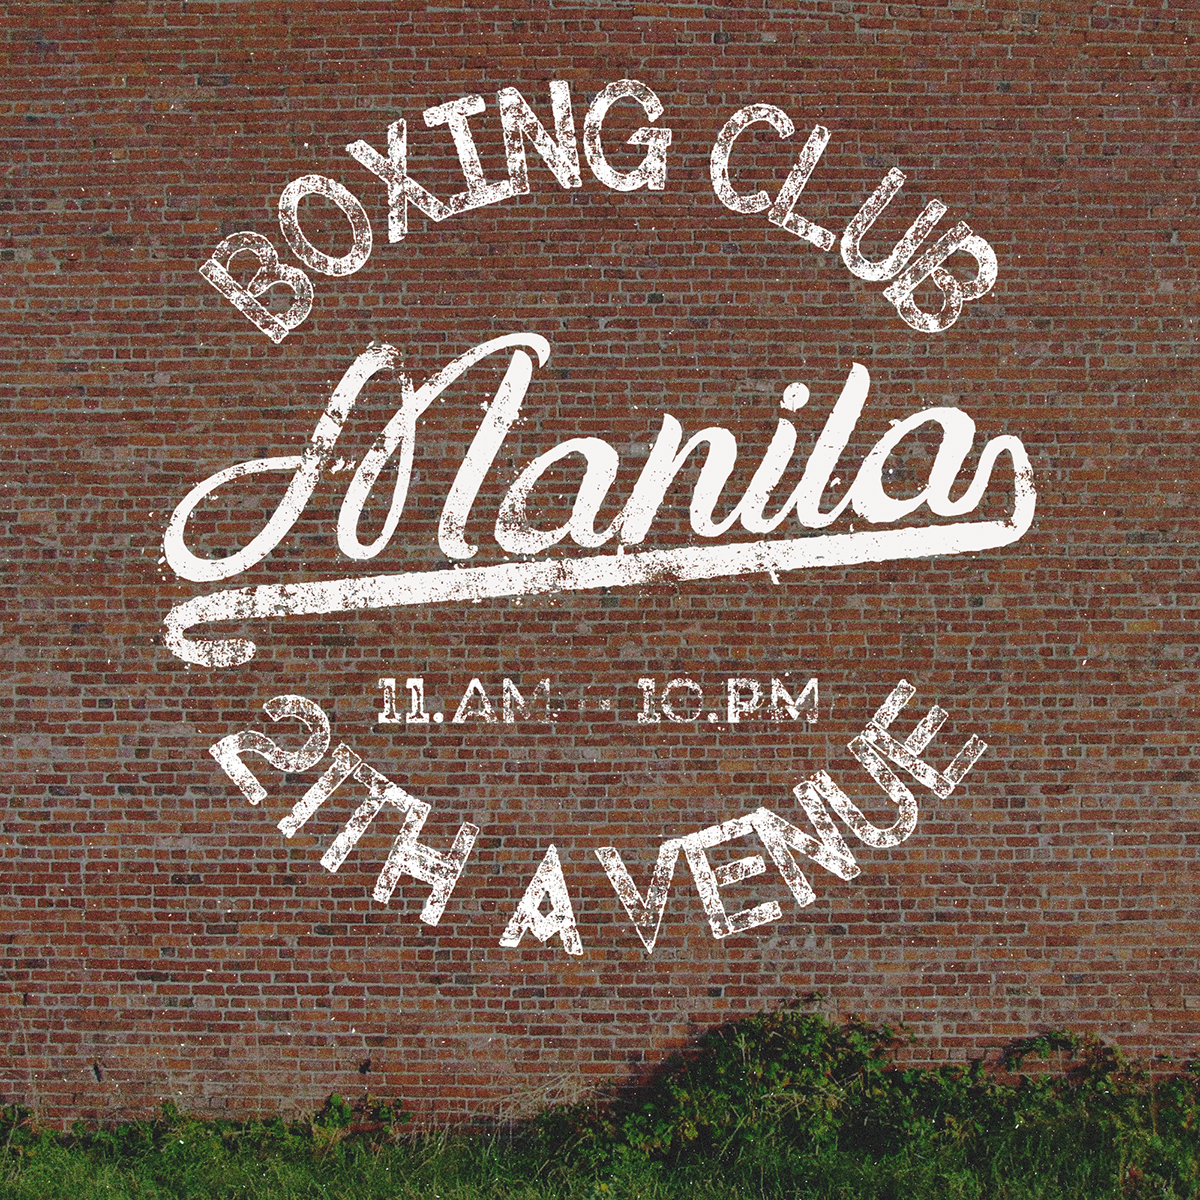 lettering ghost signs signature sign vintage Retro grunge effects adobe illustrator graphic styles subtle creative market ad 50s 60s